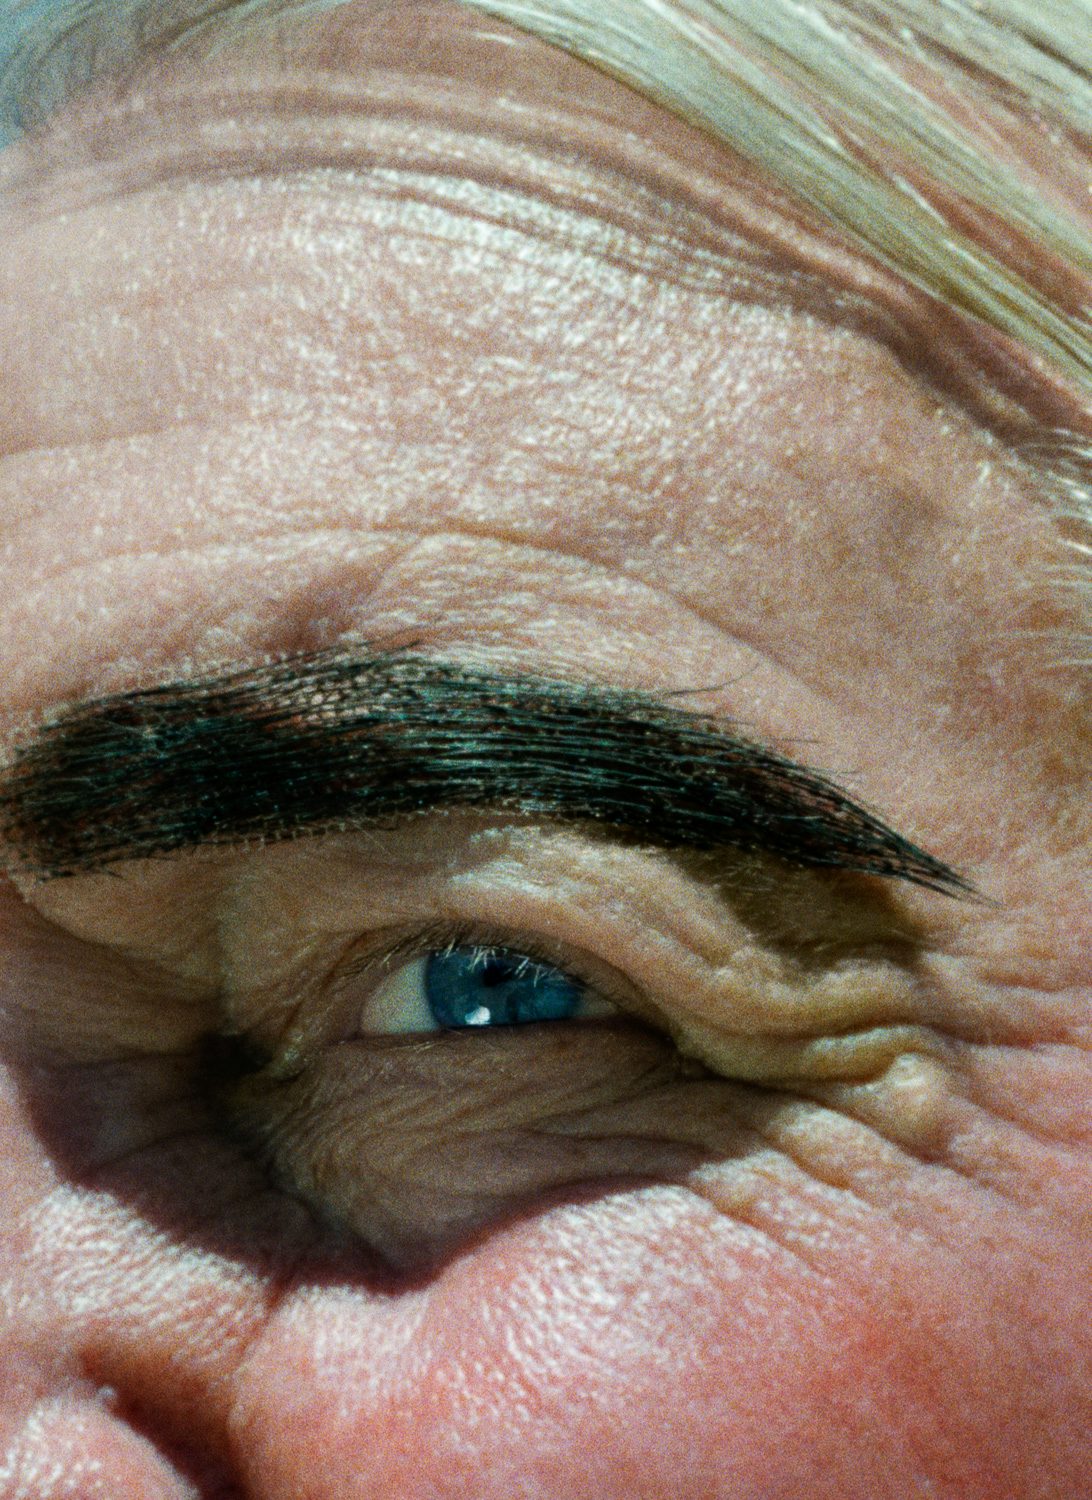 The image by Alex Prager shows a close-up of a portrait photo of the eye area of ​​a person who appears to be wearing dark eyebrows to stick on